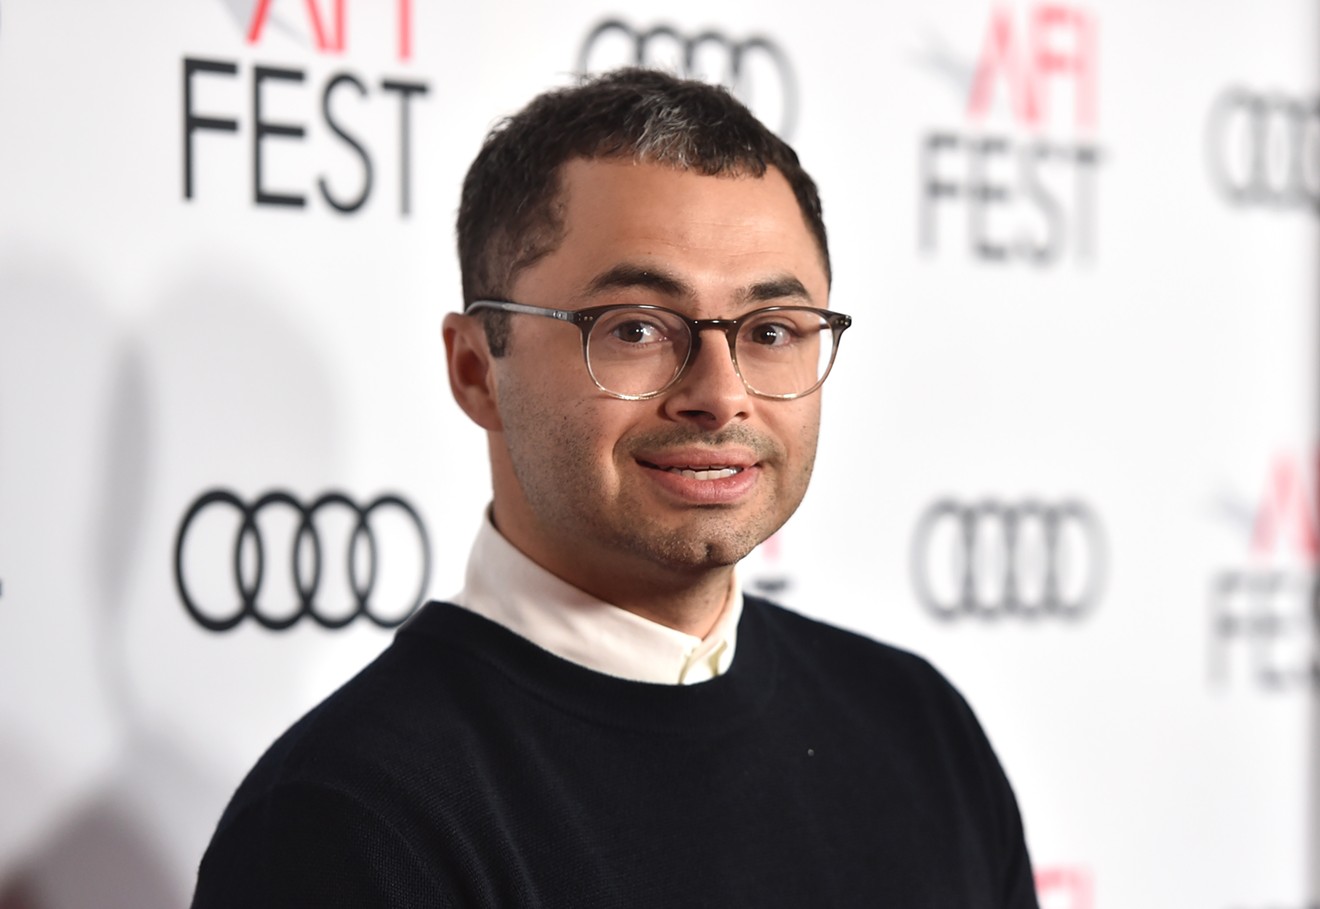 Comedian Joe Mande doesn't find Ted Cruz's dad jokes funny, but neither do children.